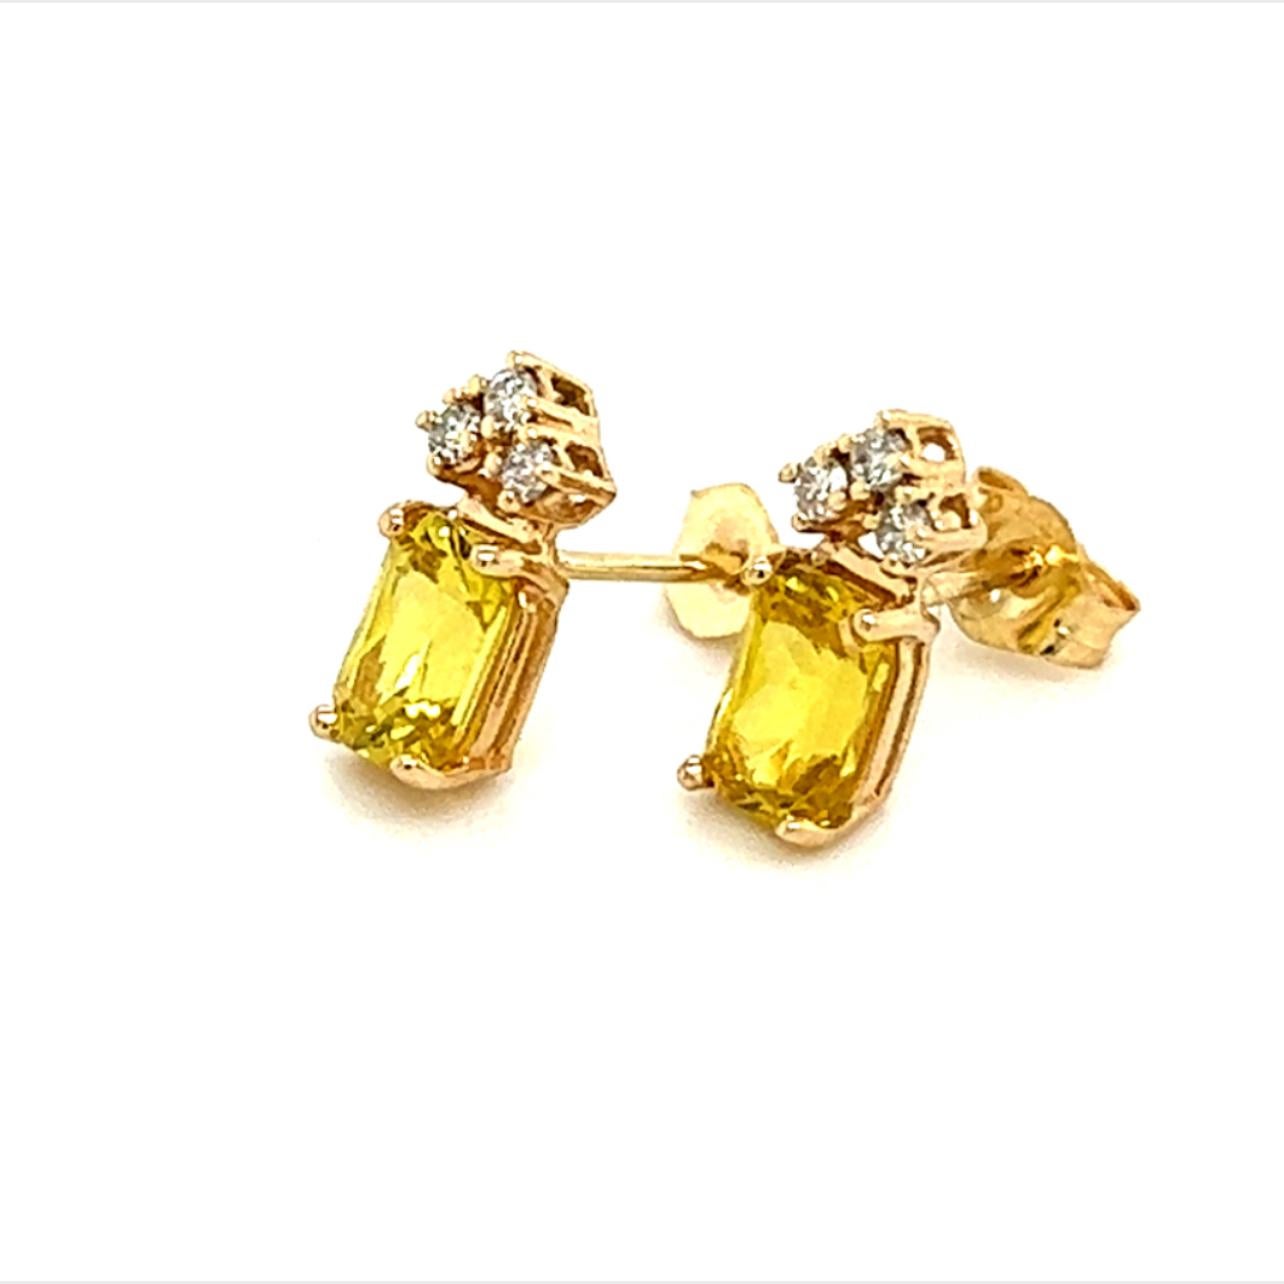 Natural Sapphire Diamond Earrings 14k Gold 1.74 TCW Certified For Sale 1